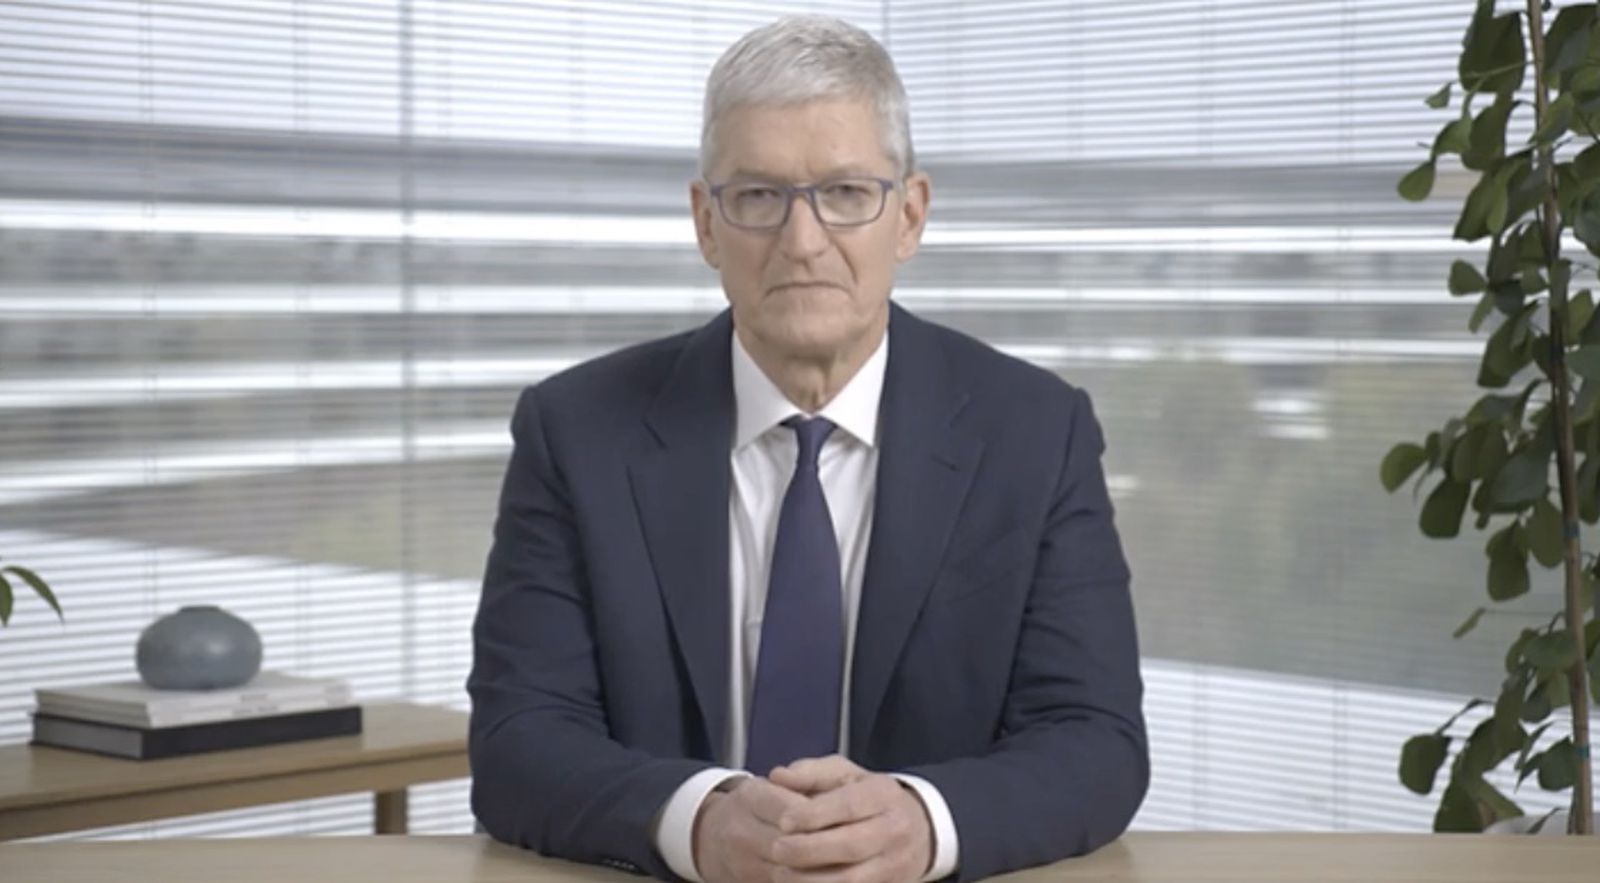 Apple CEO Tim Cook: Privacy is ‘one of the top issues of the century’